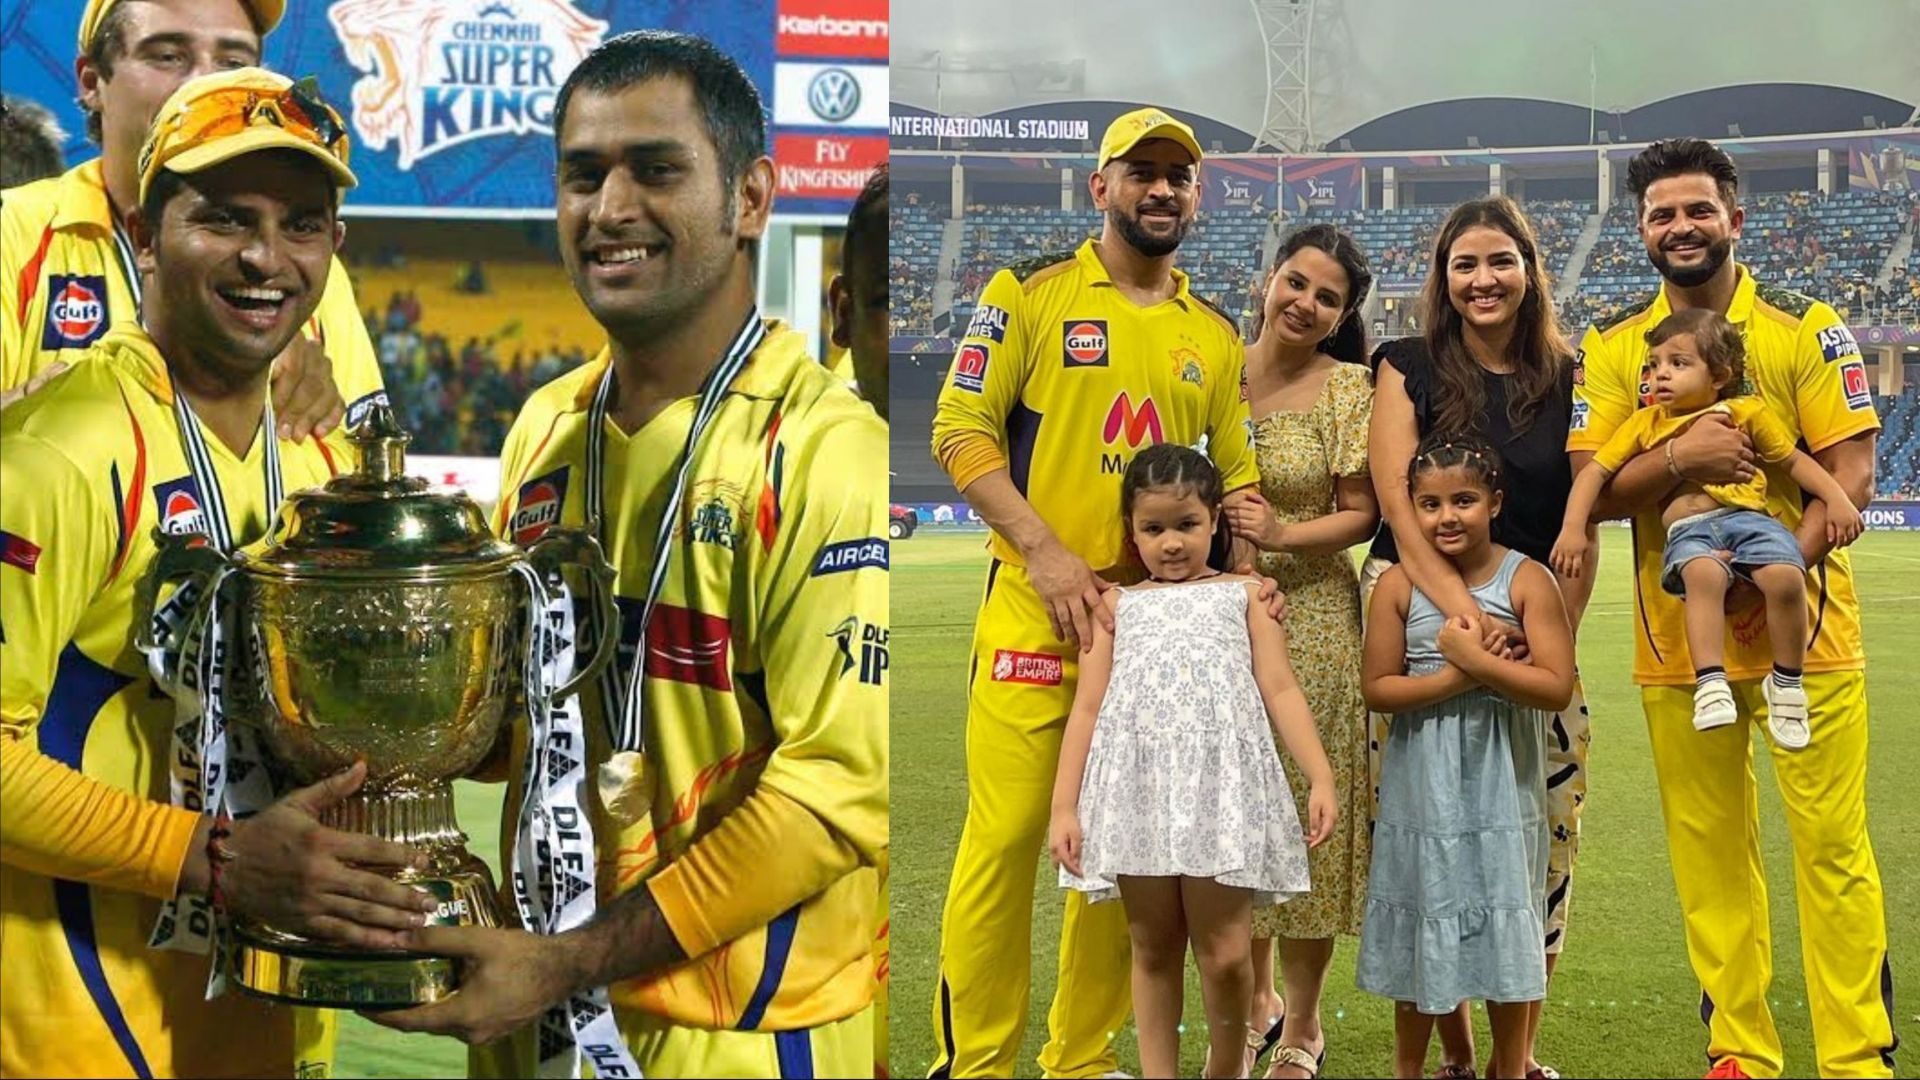 MS Dhoni and Suresh Raina have been important members of the Chennai Super Kings team